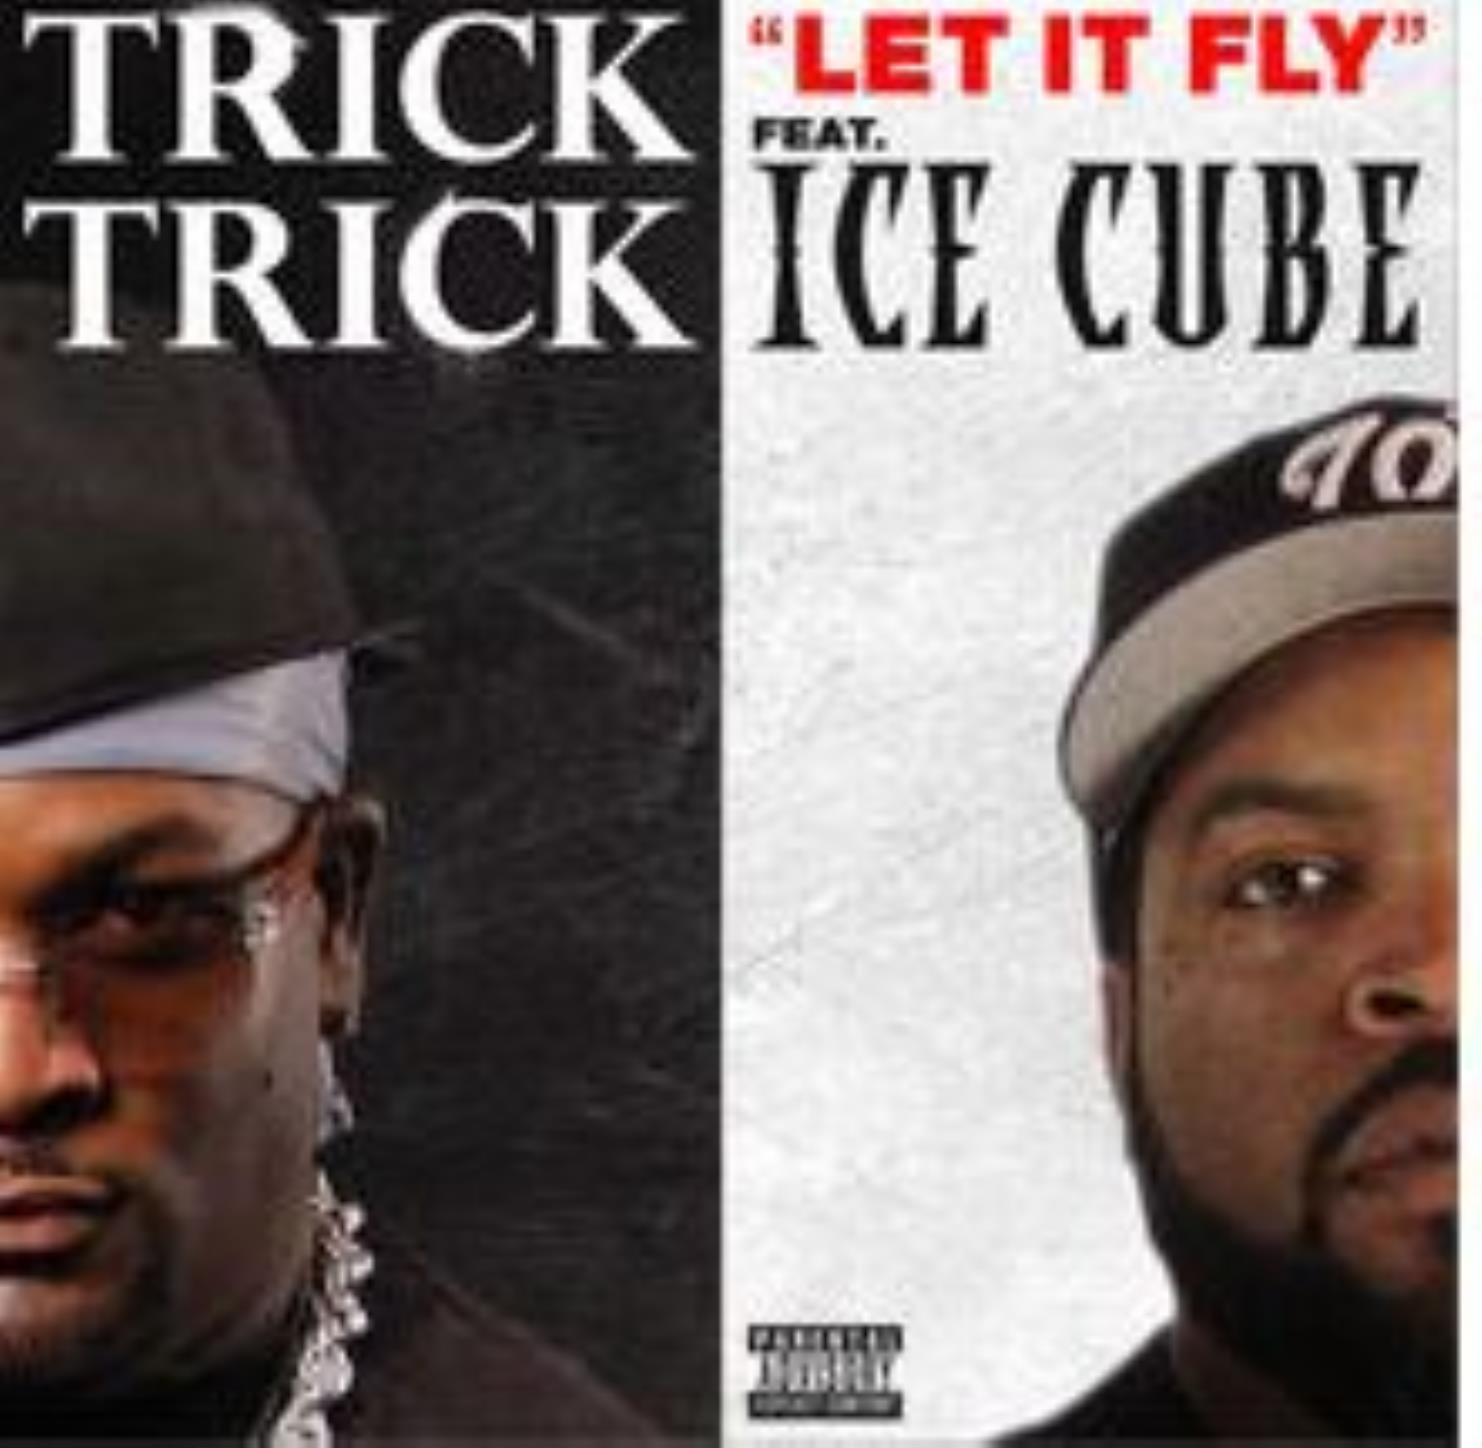 Let It Fly (Feat. Ice Cube)